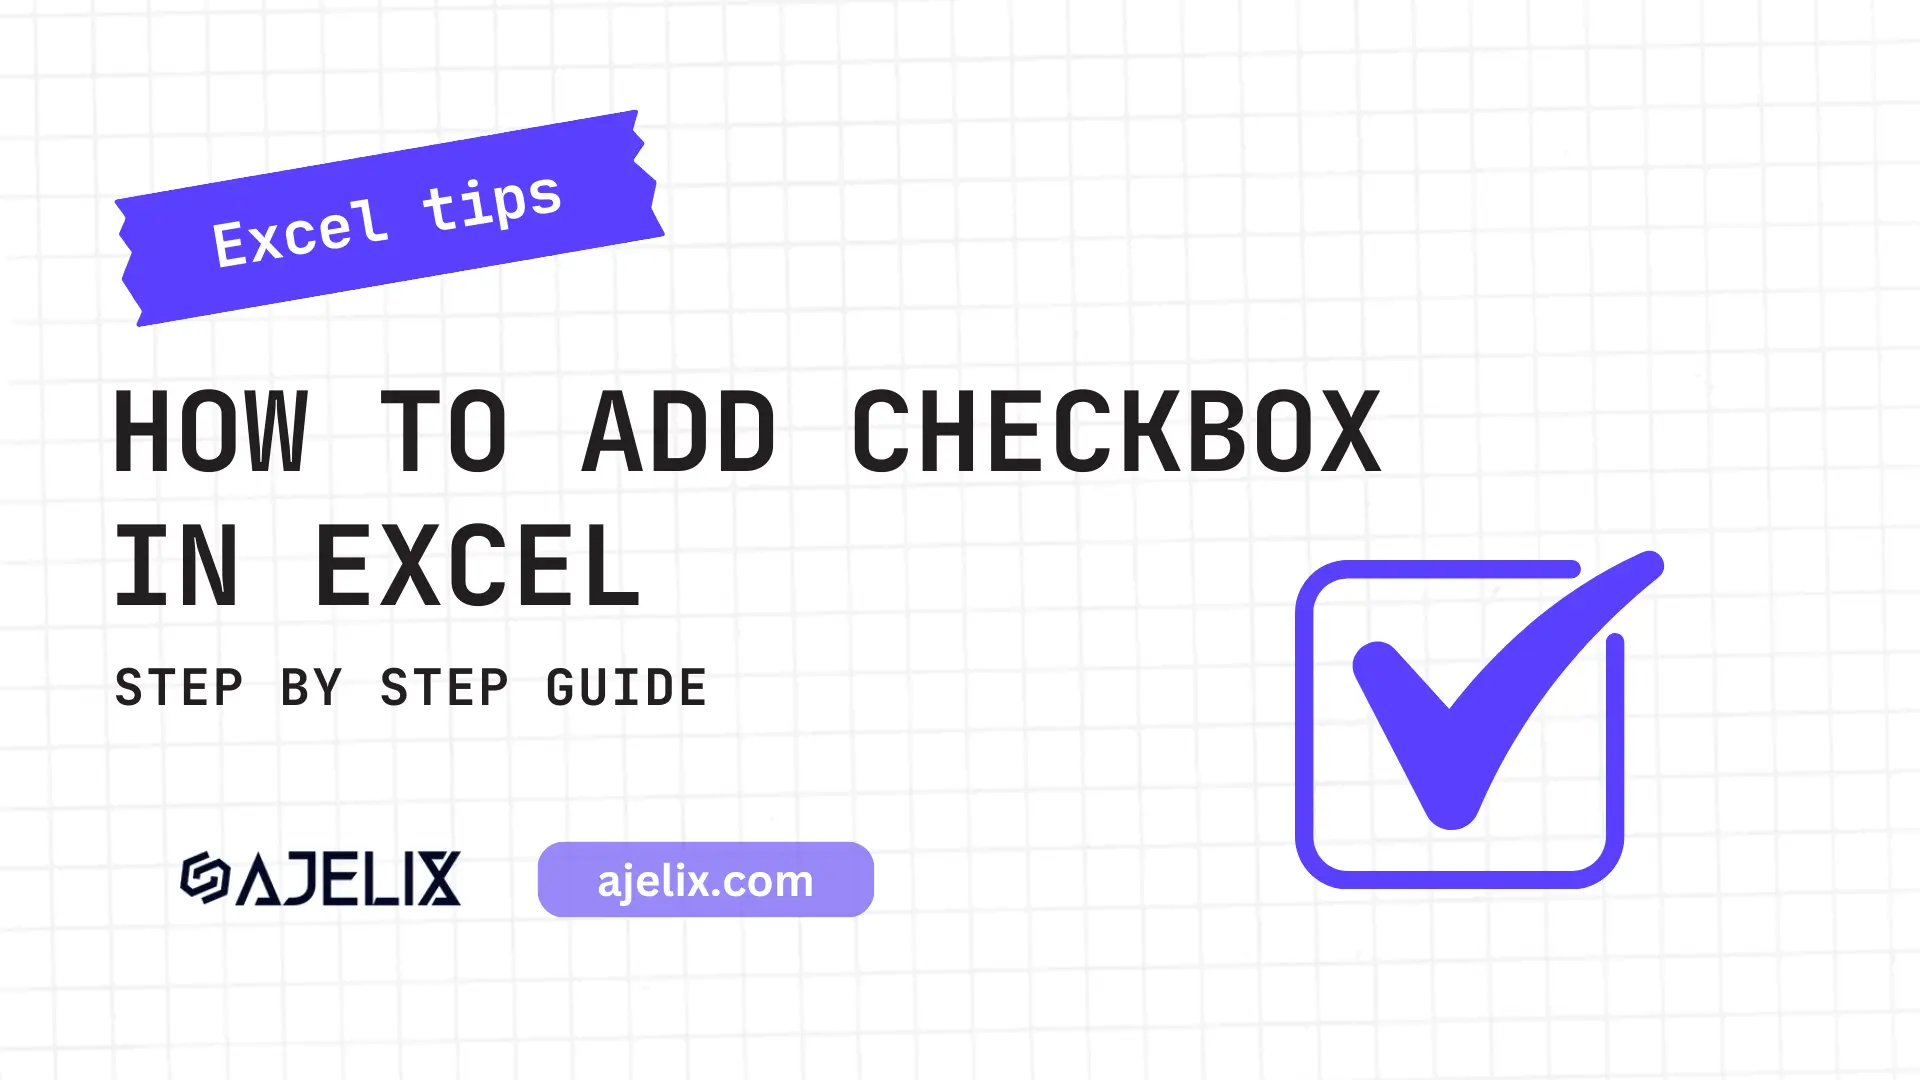 How To Add Checkboxes In Excel